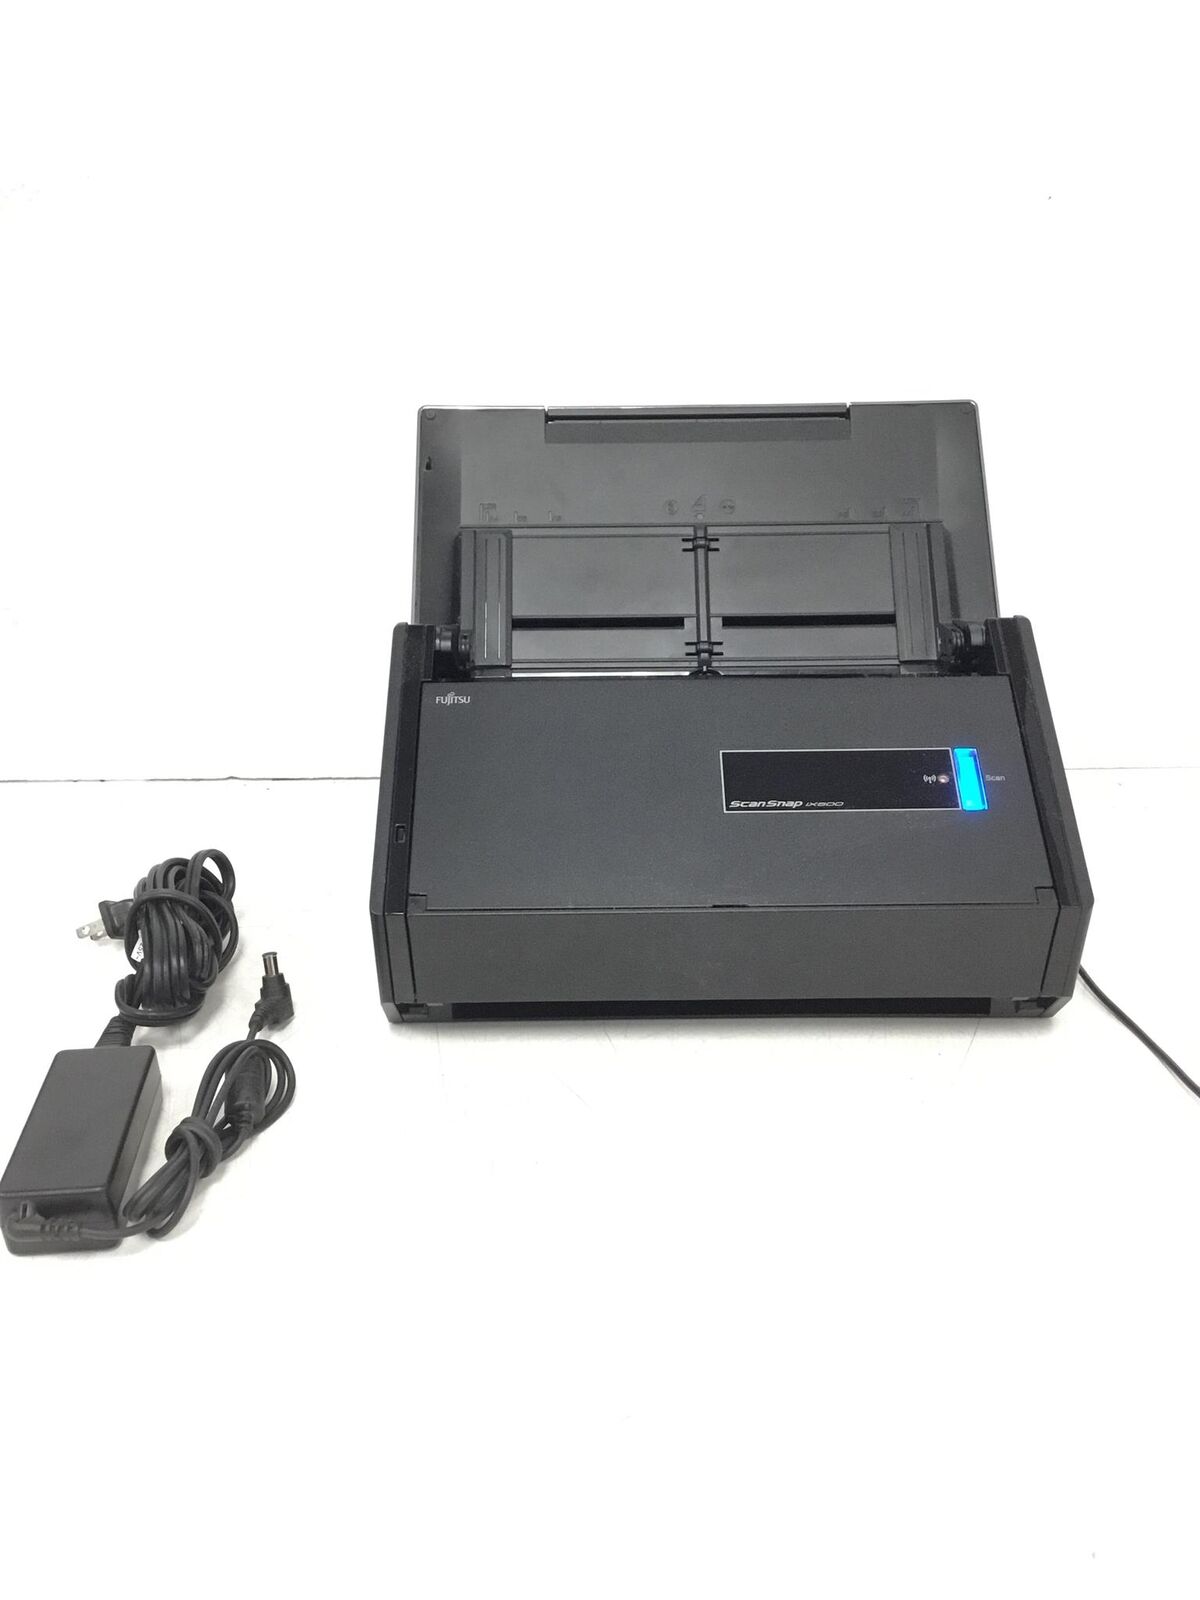 FUJITSU Scansnap IX500 Document Scanner with AC Adapter ADF 15K Pages Scanned